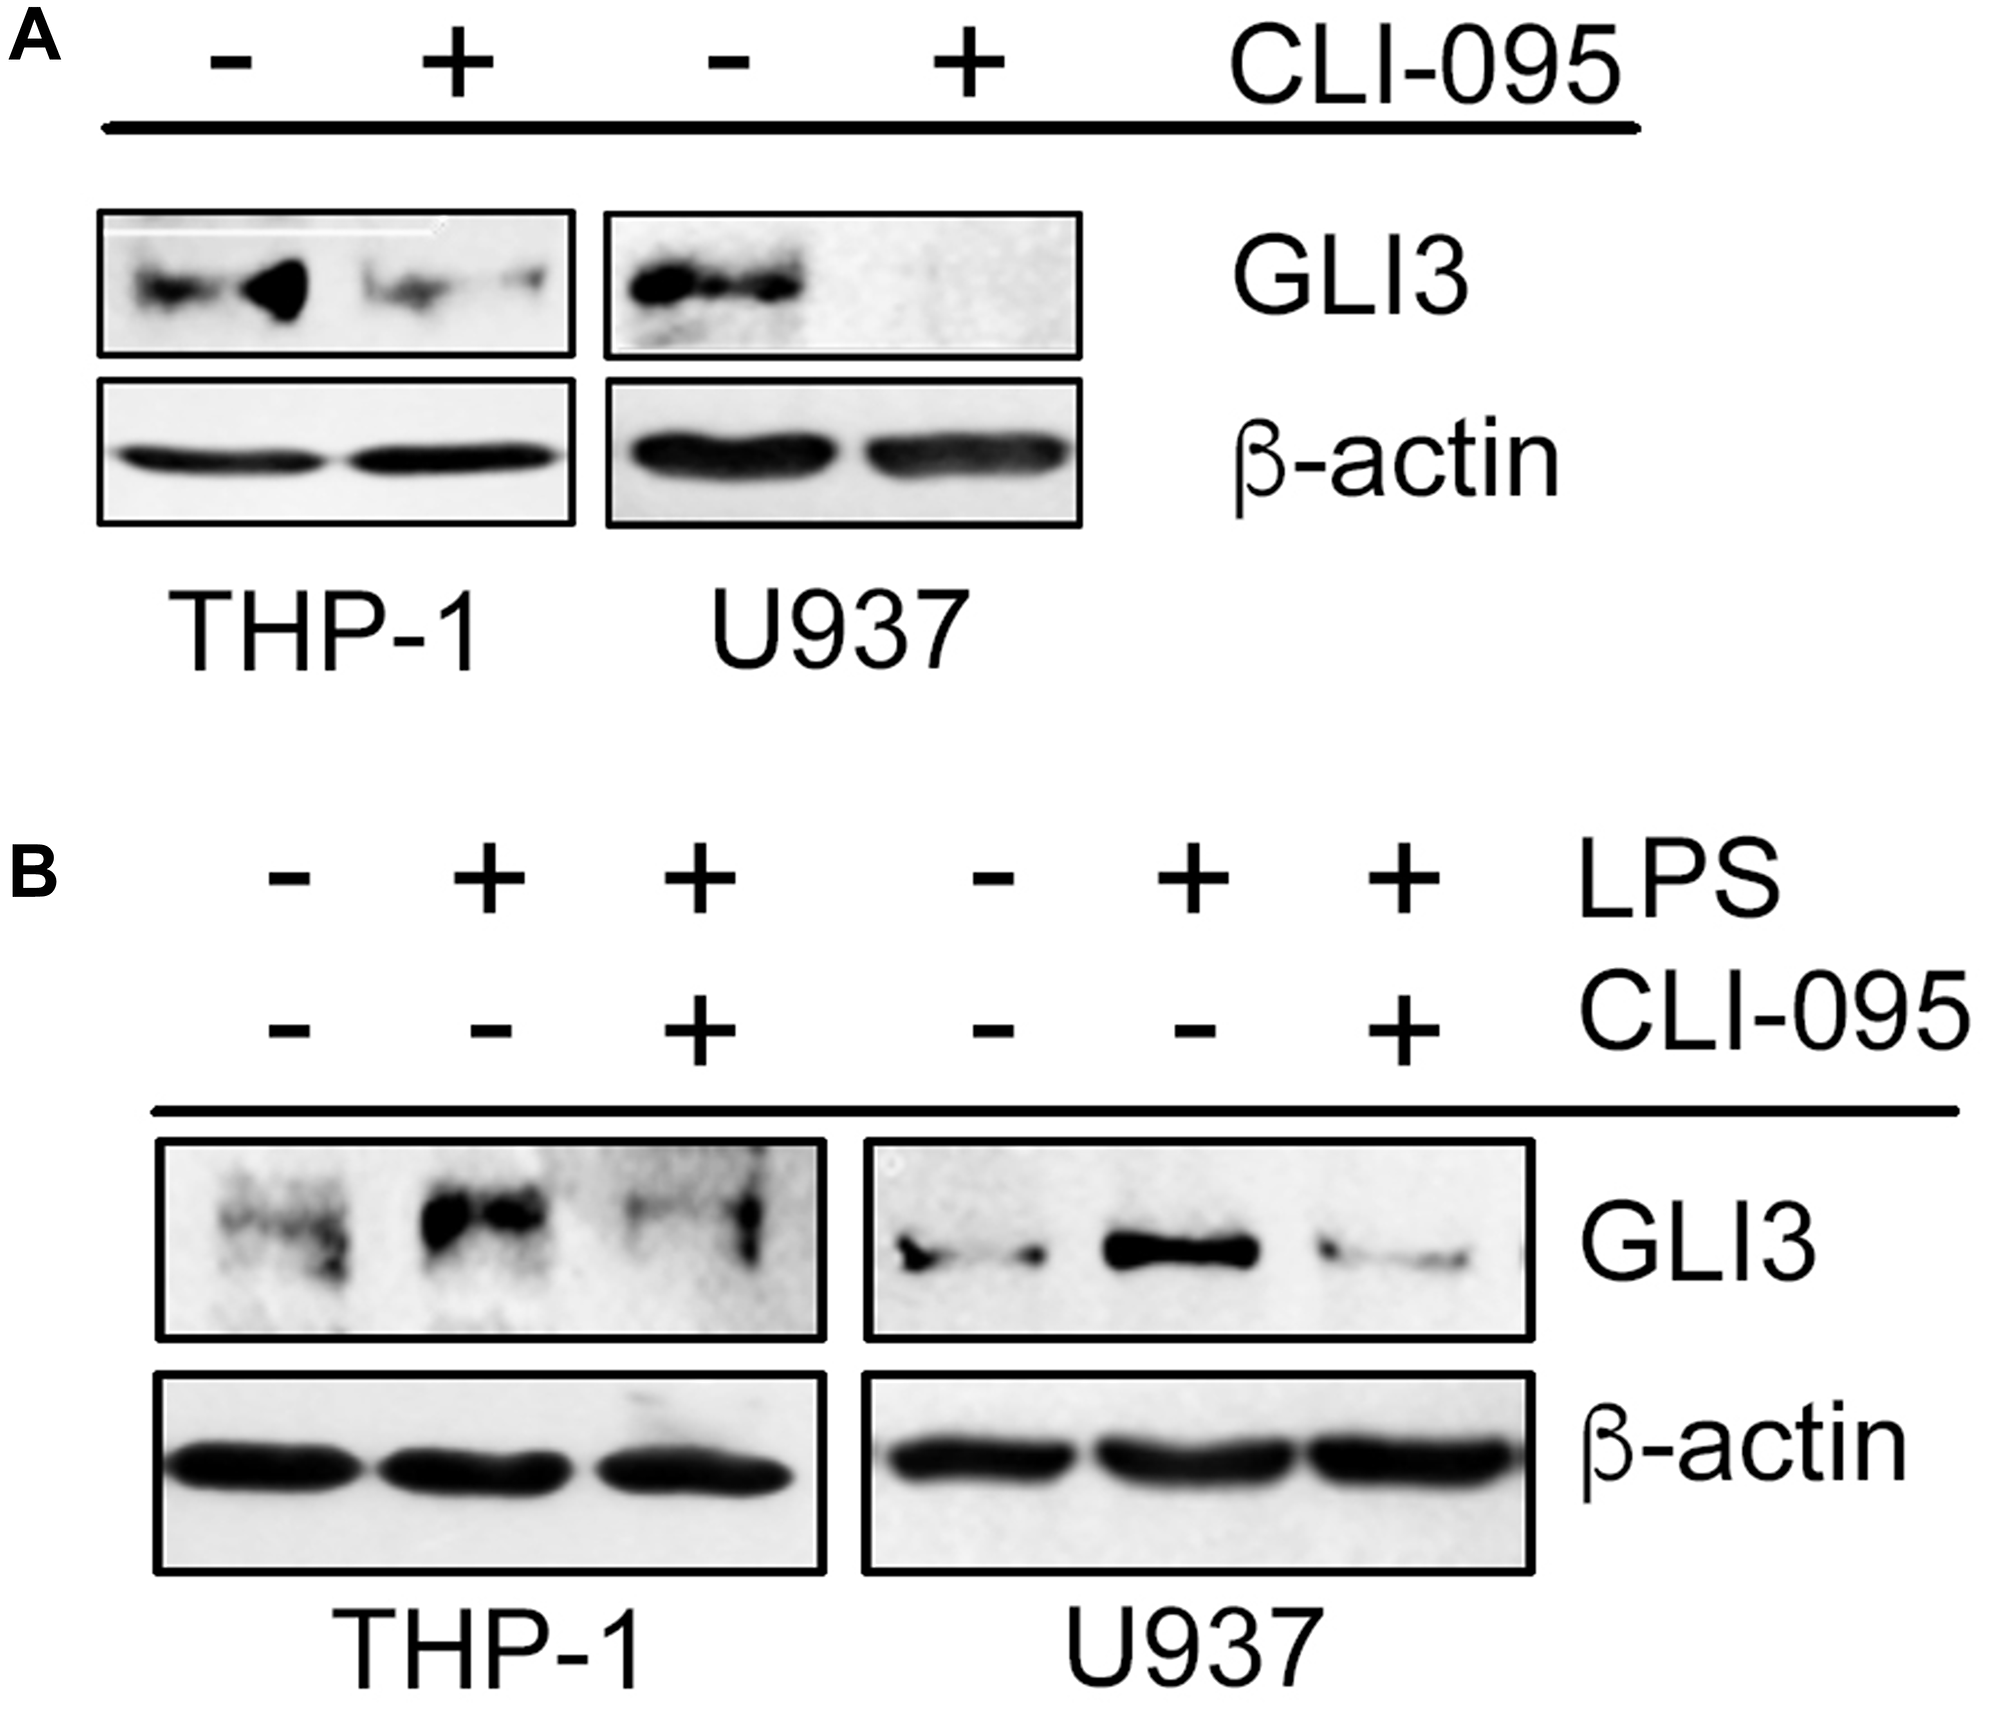 Functional TLR4 is required for GLI3 expression.